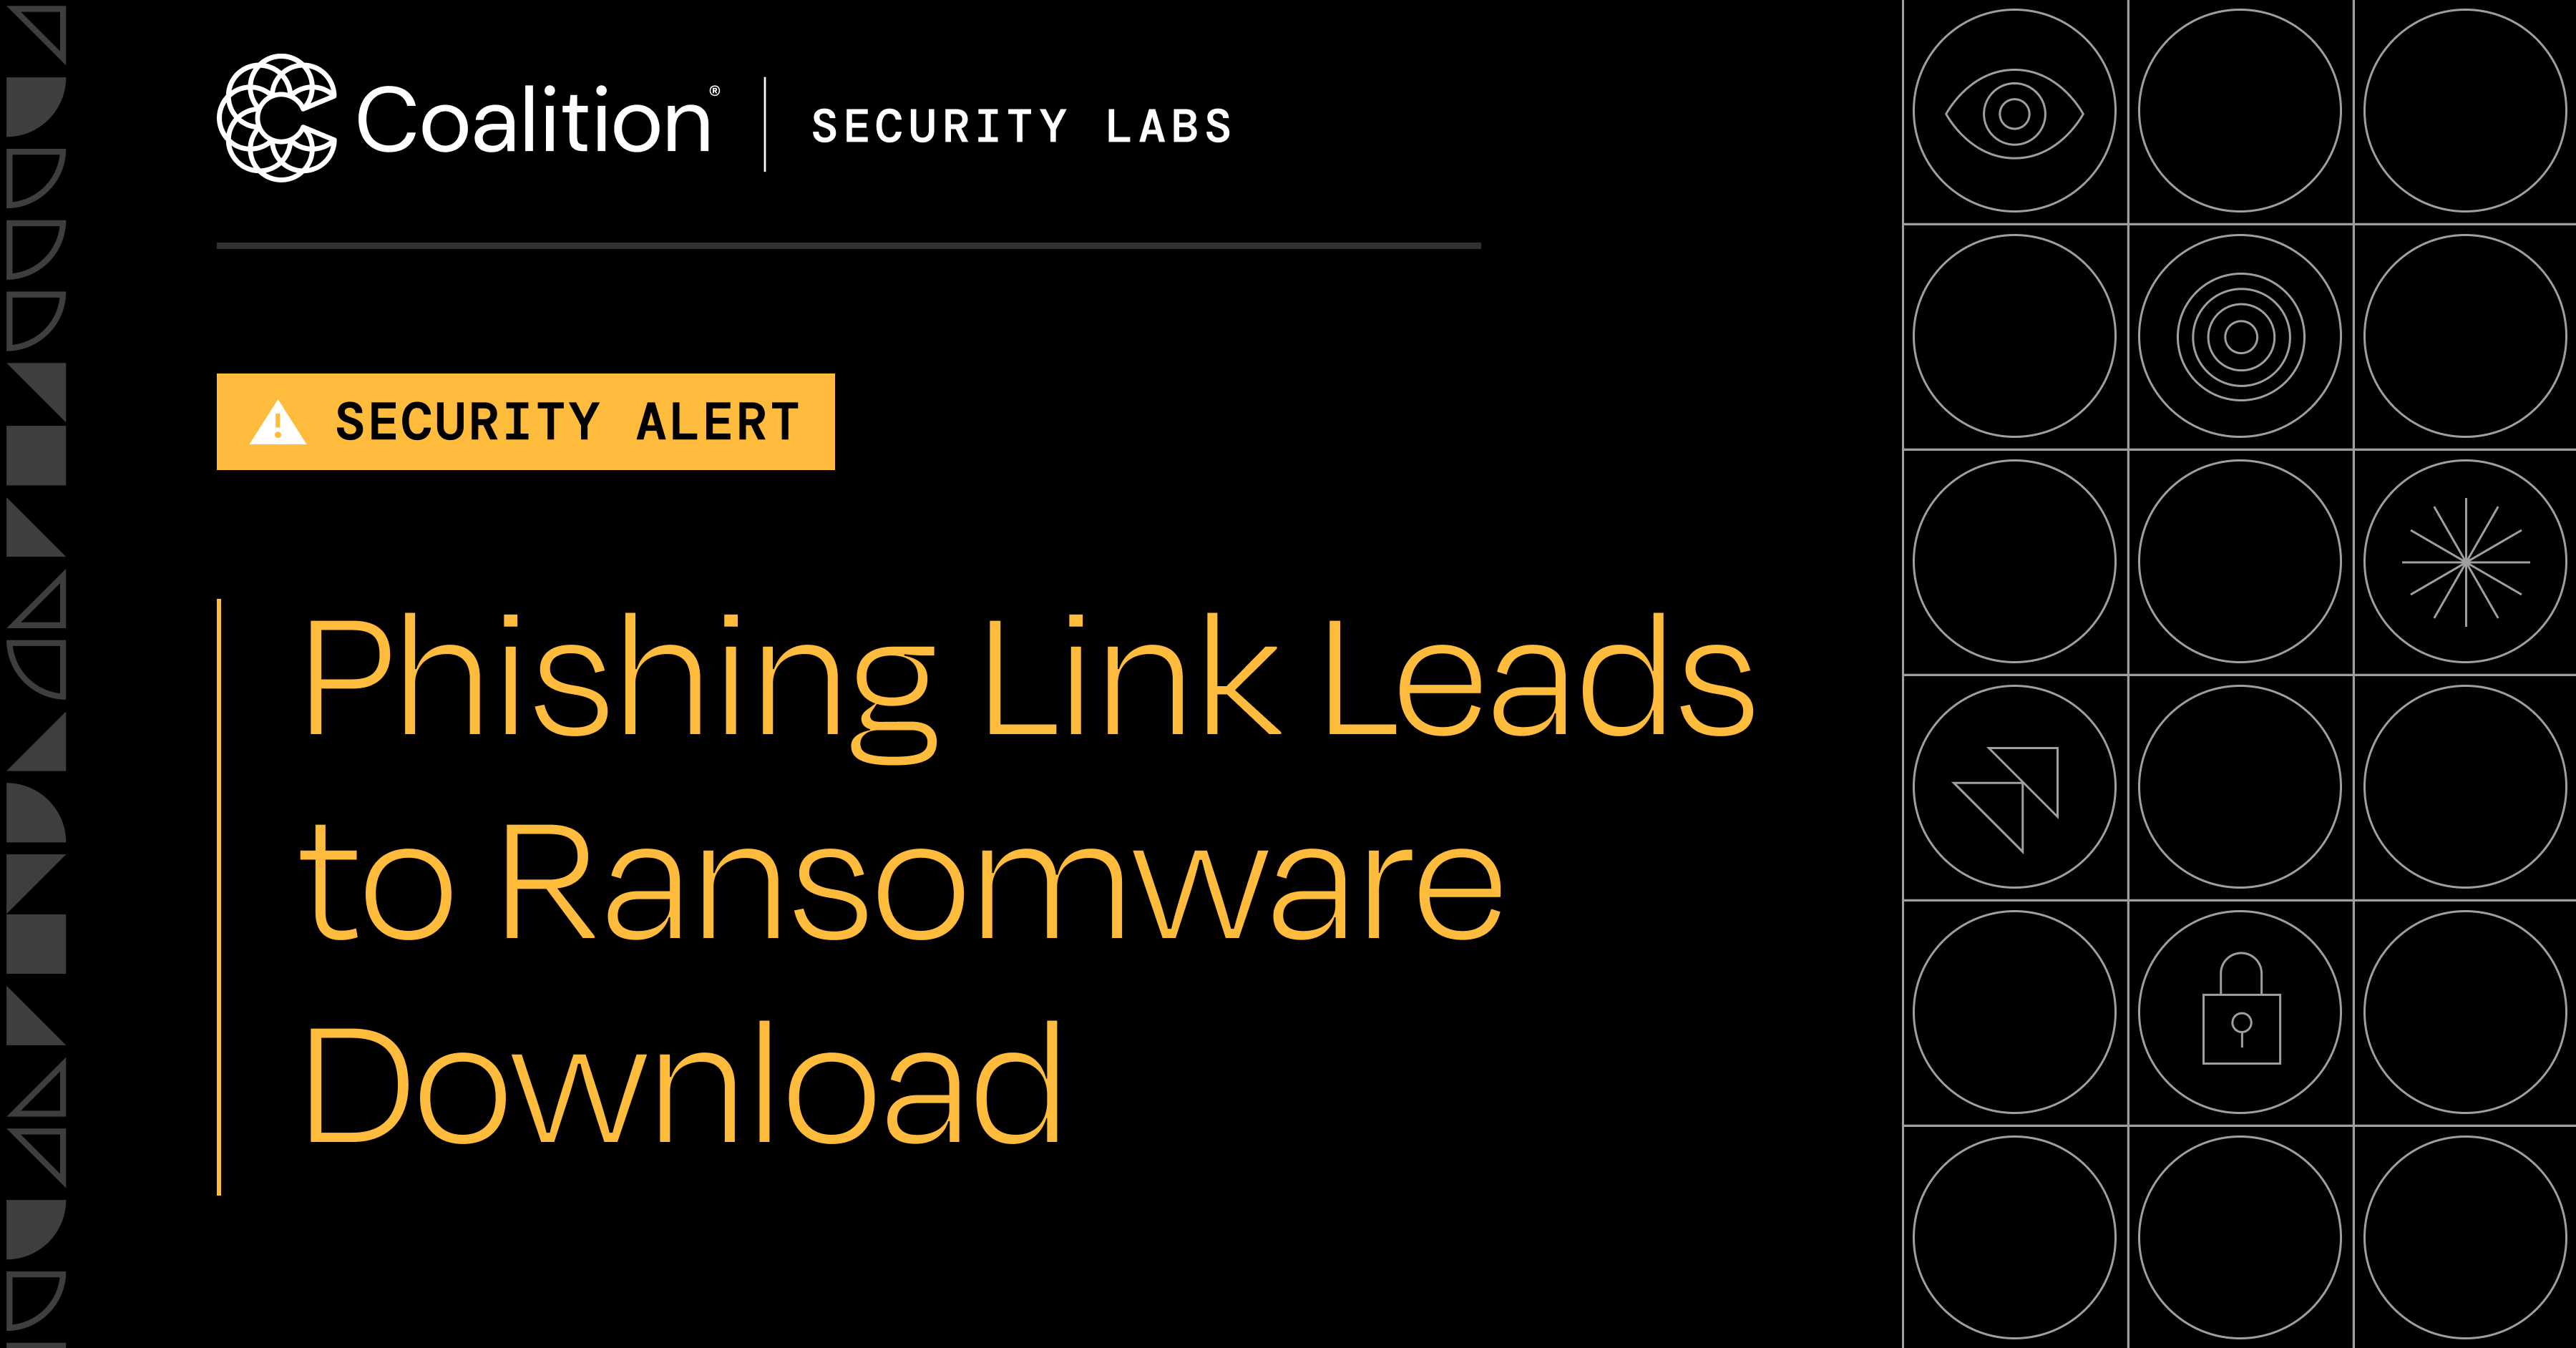 Coalition Blog Security Alert: Phishing Link Leads to Ransomware Download 